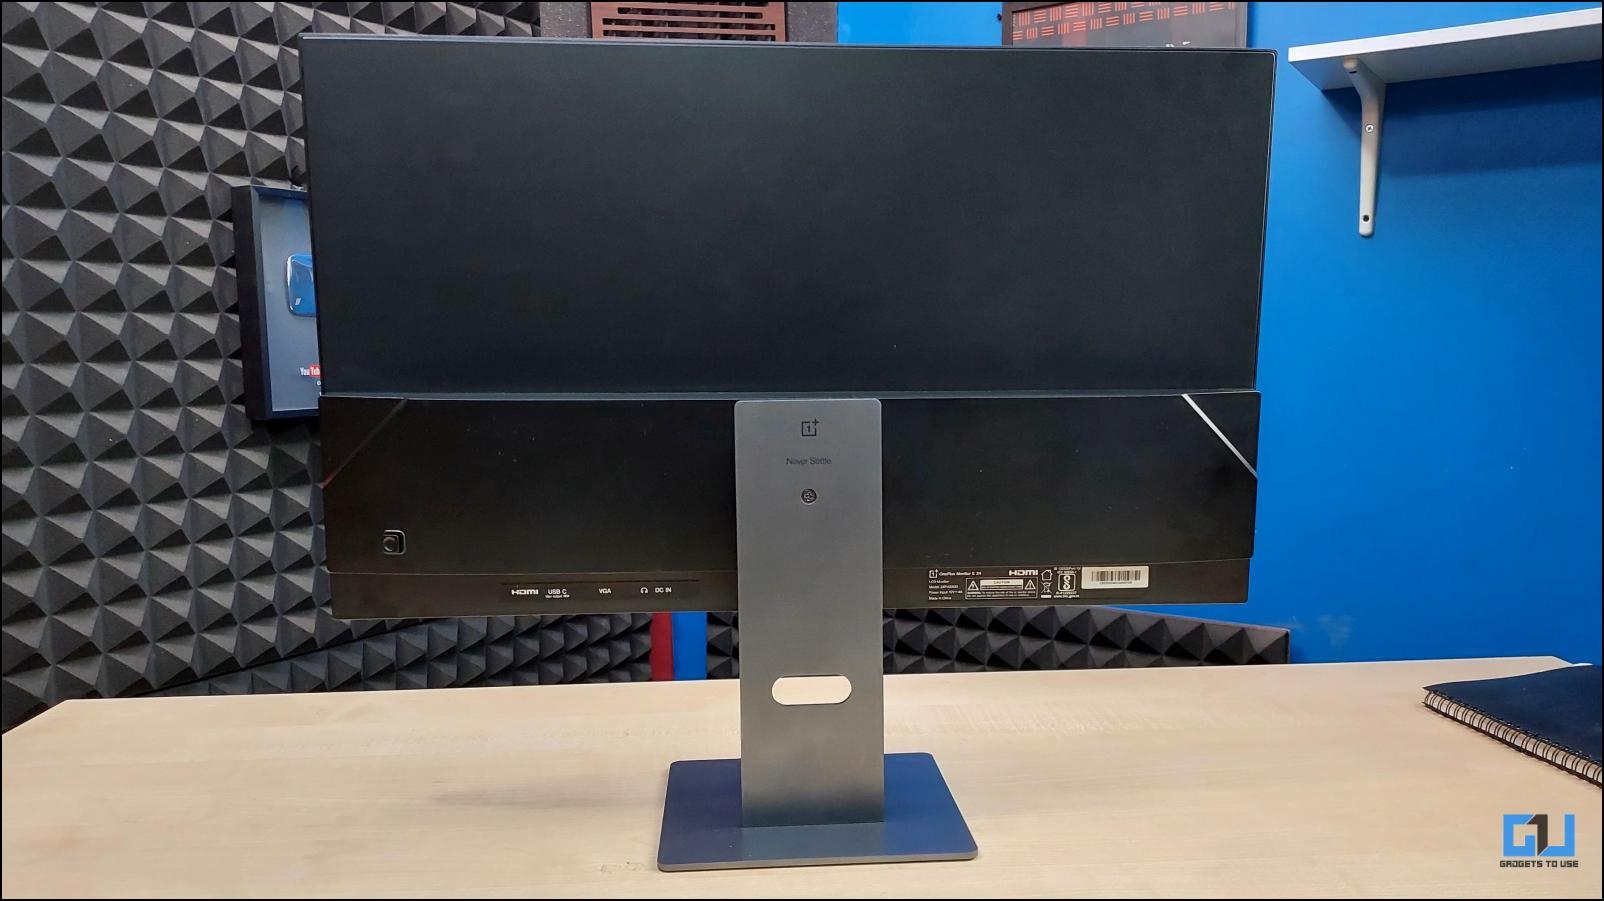 A OnePlus monitor placed on the table